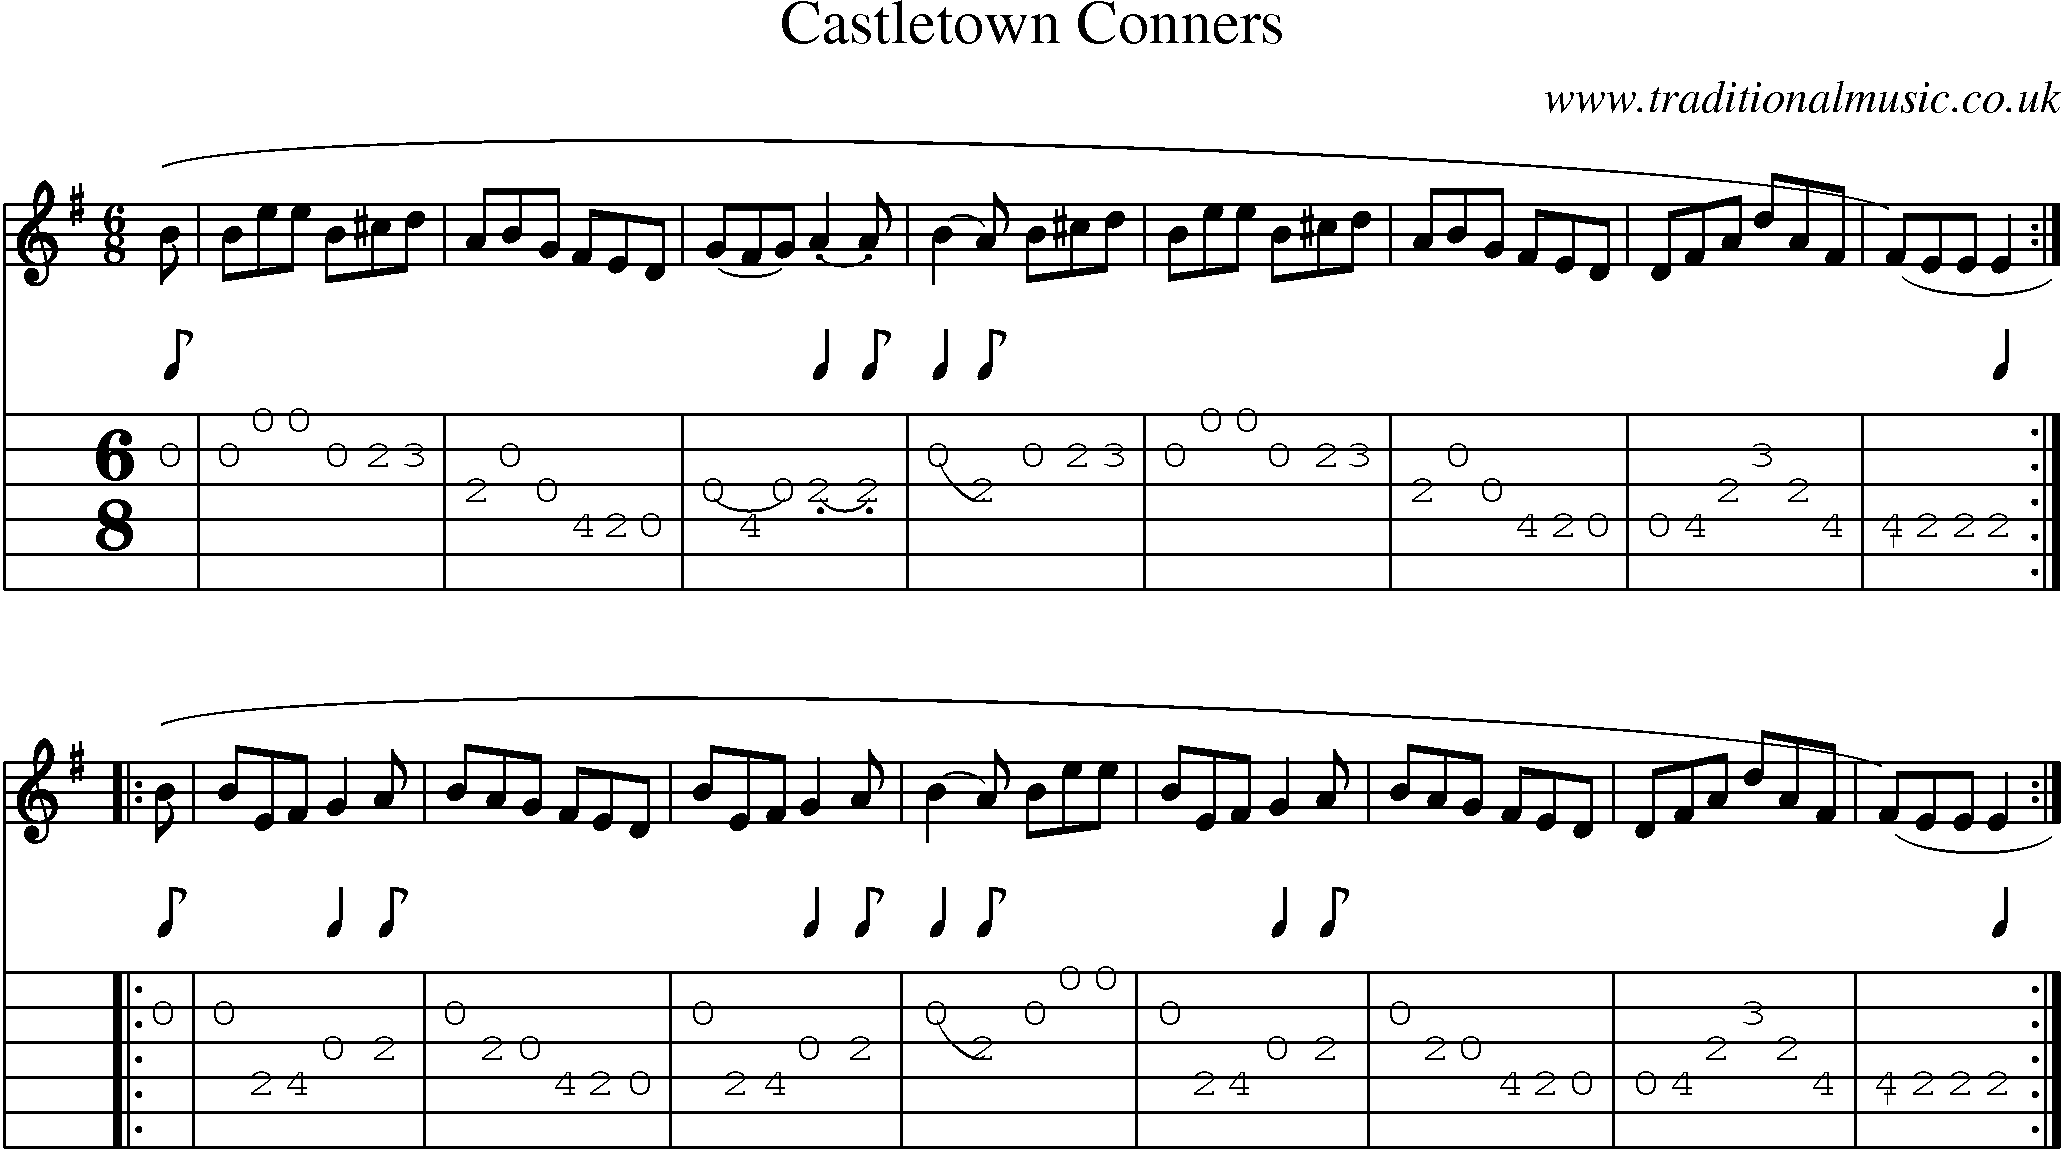 Music Score and Guitar Tabs for Castletown Conners